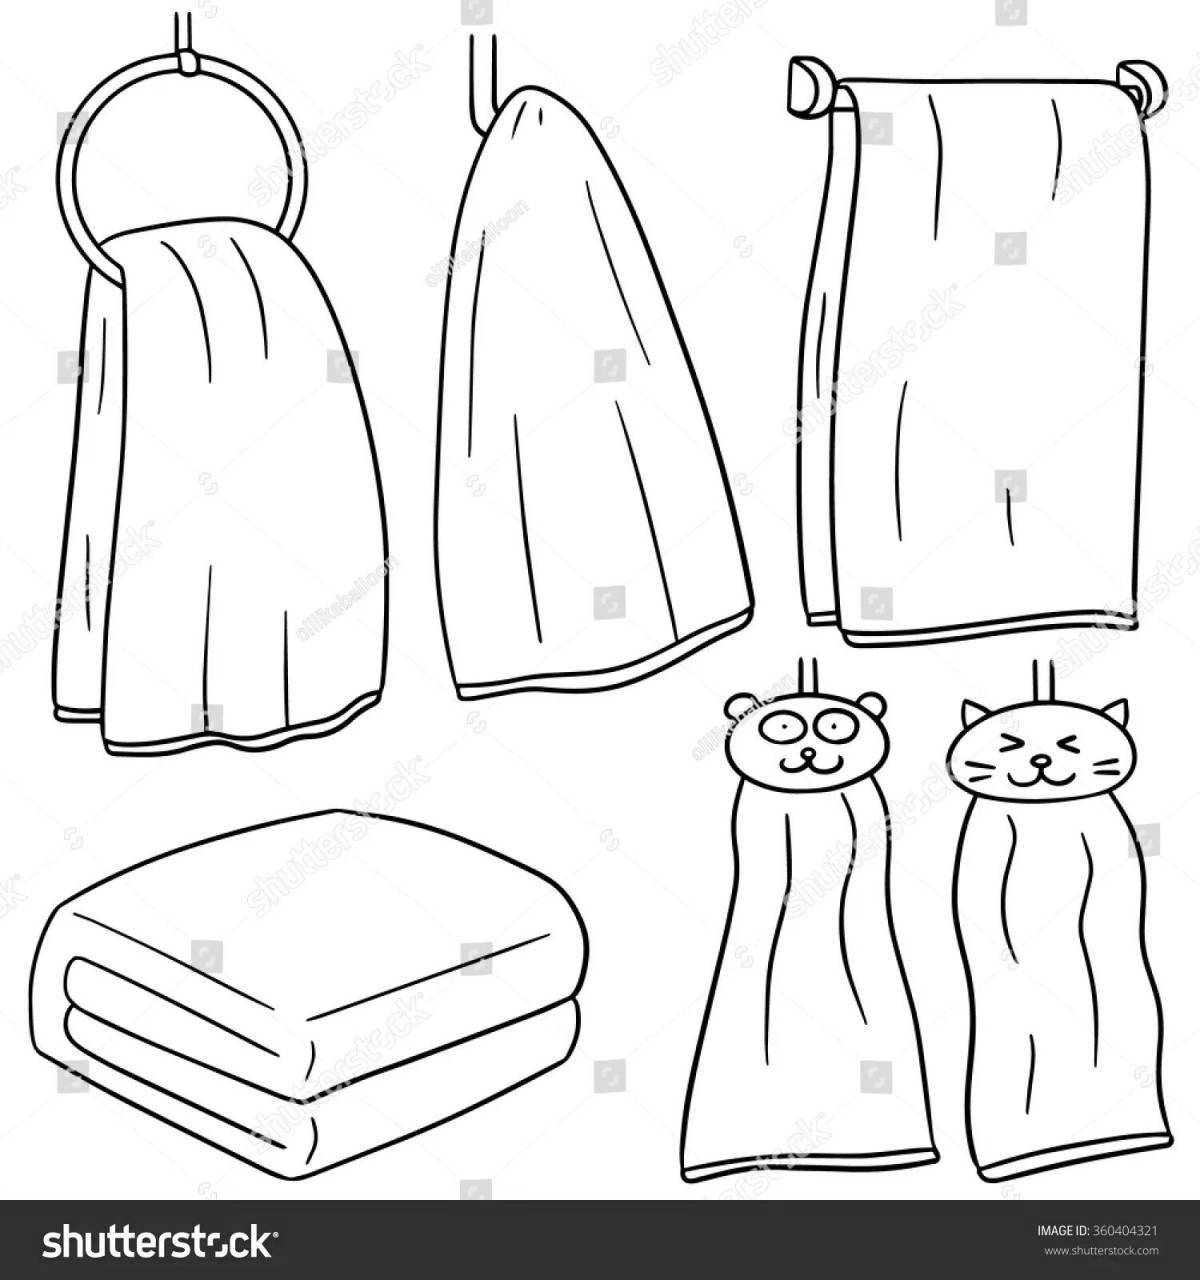 Colorful towel coloring page for 3-4 year olds